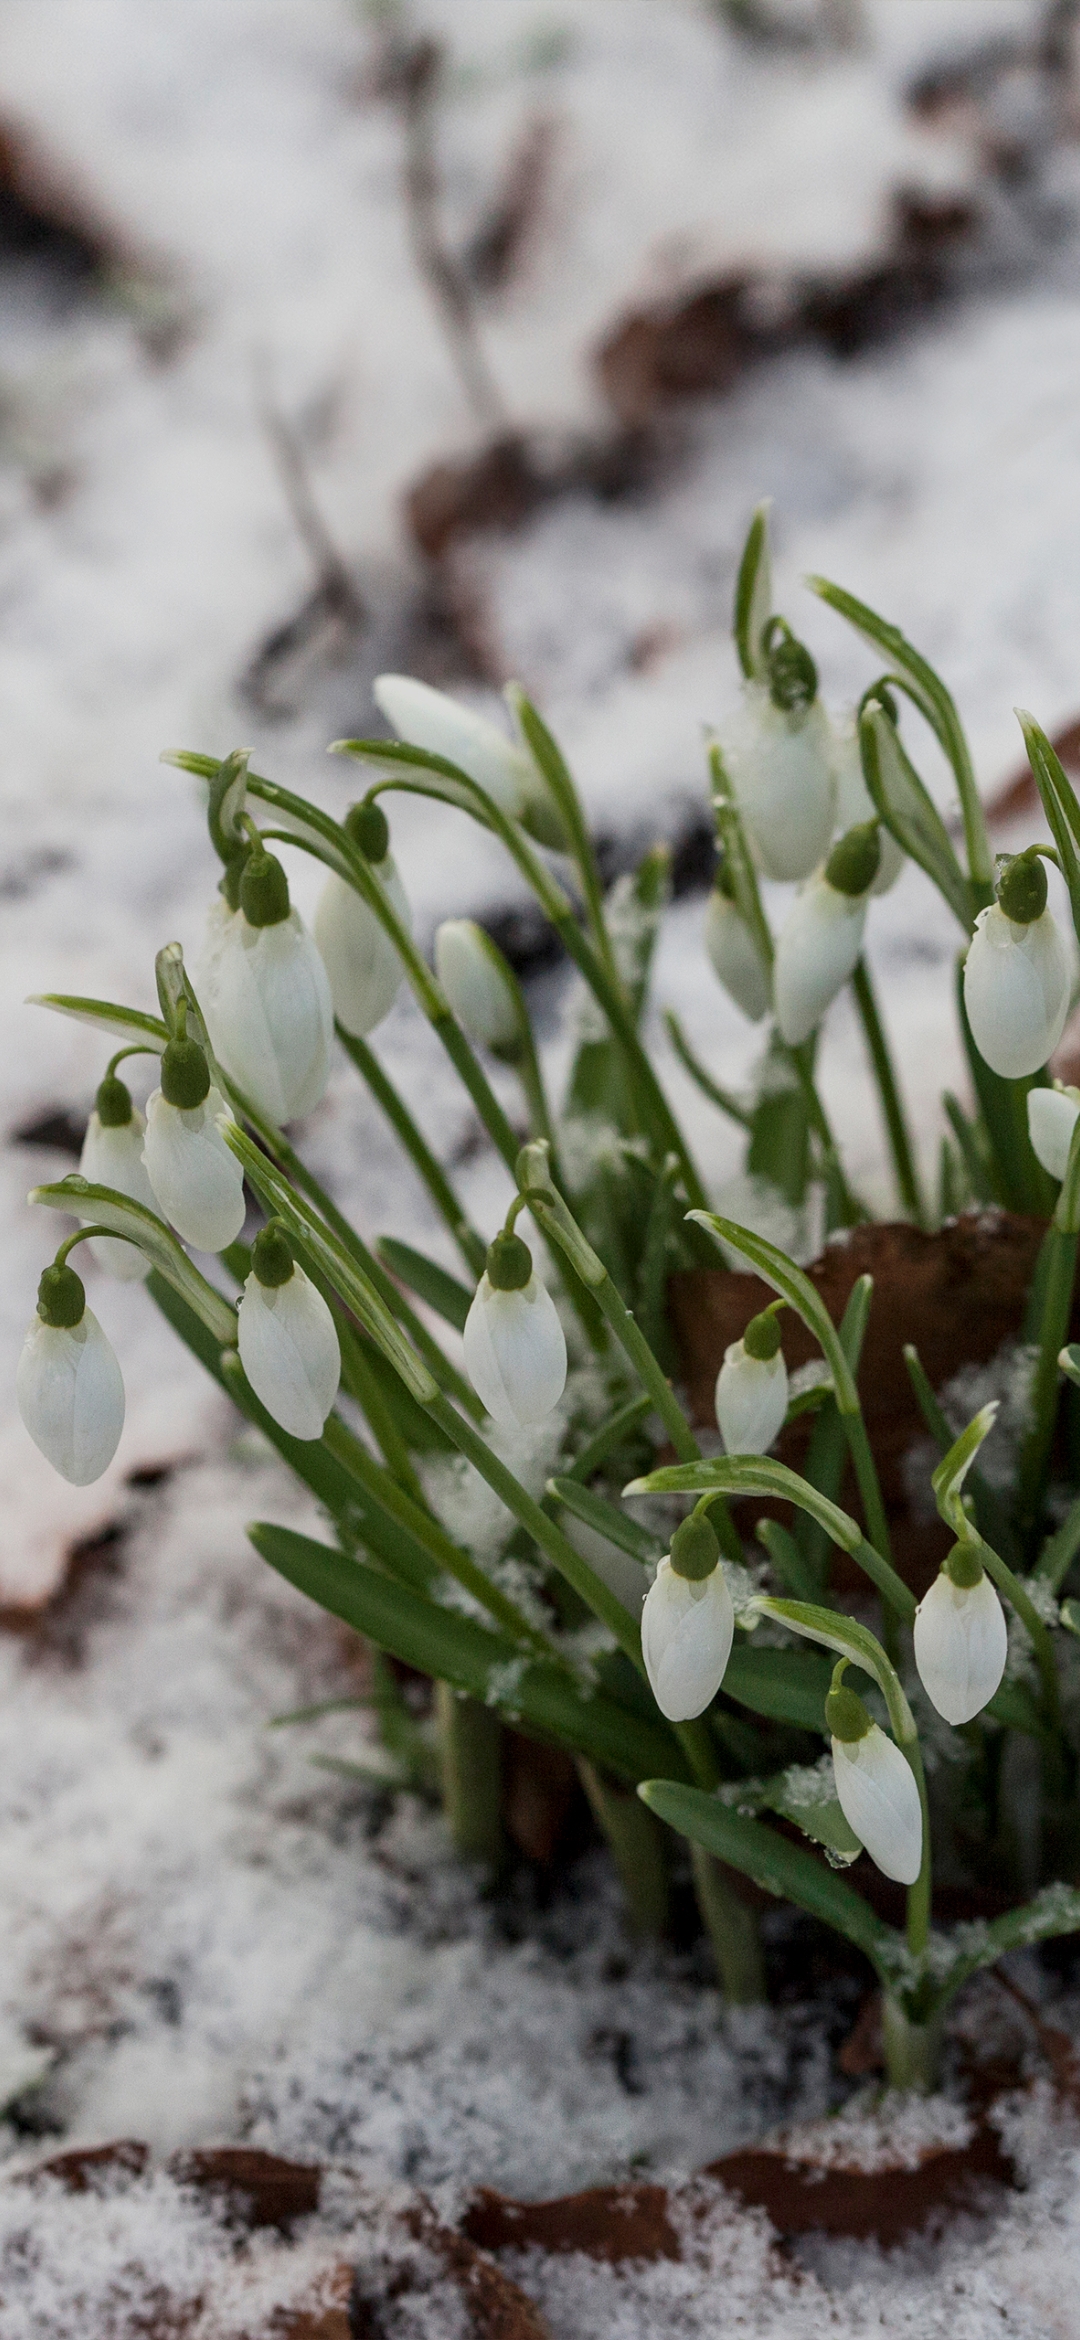 Flowers on plant in snow